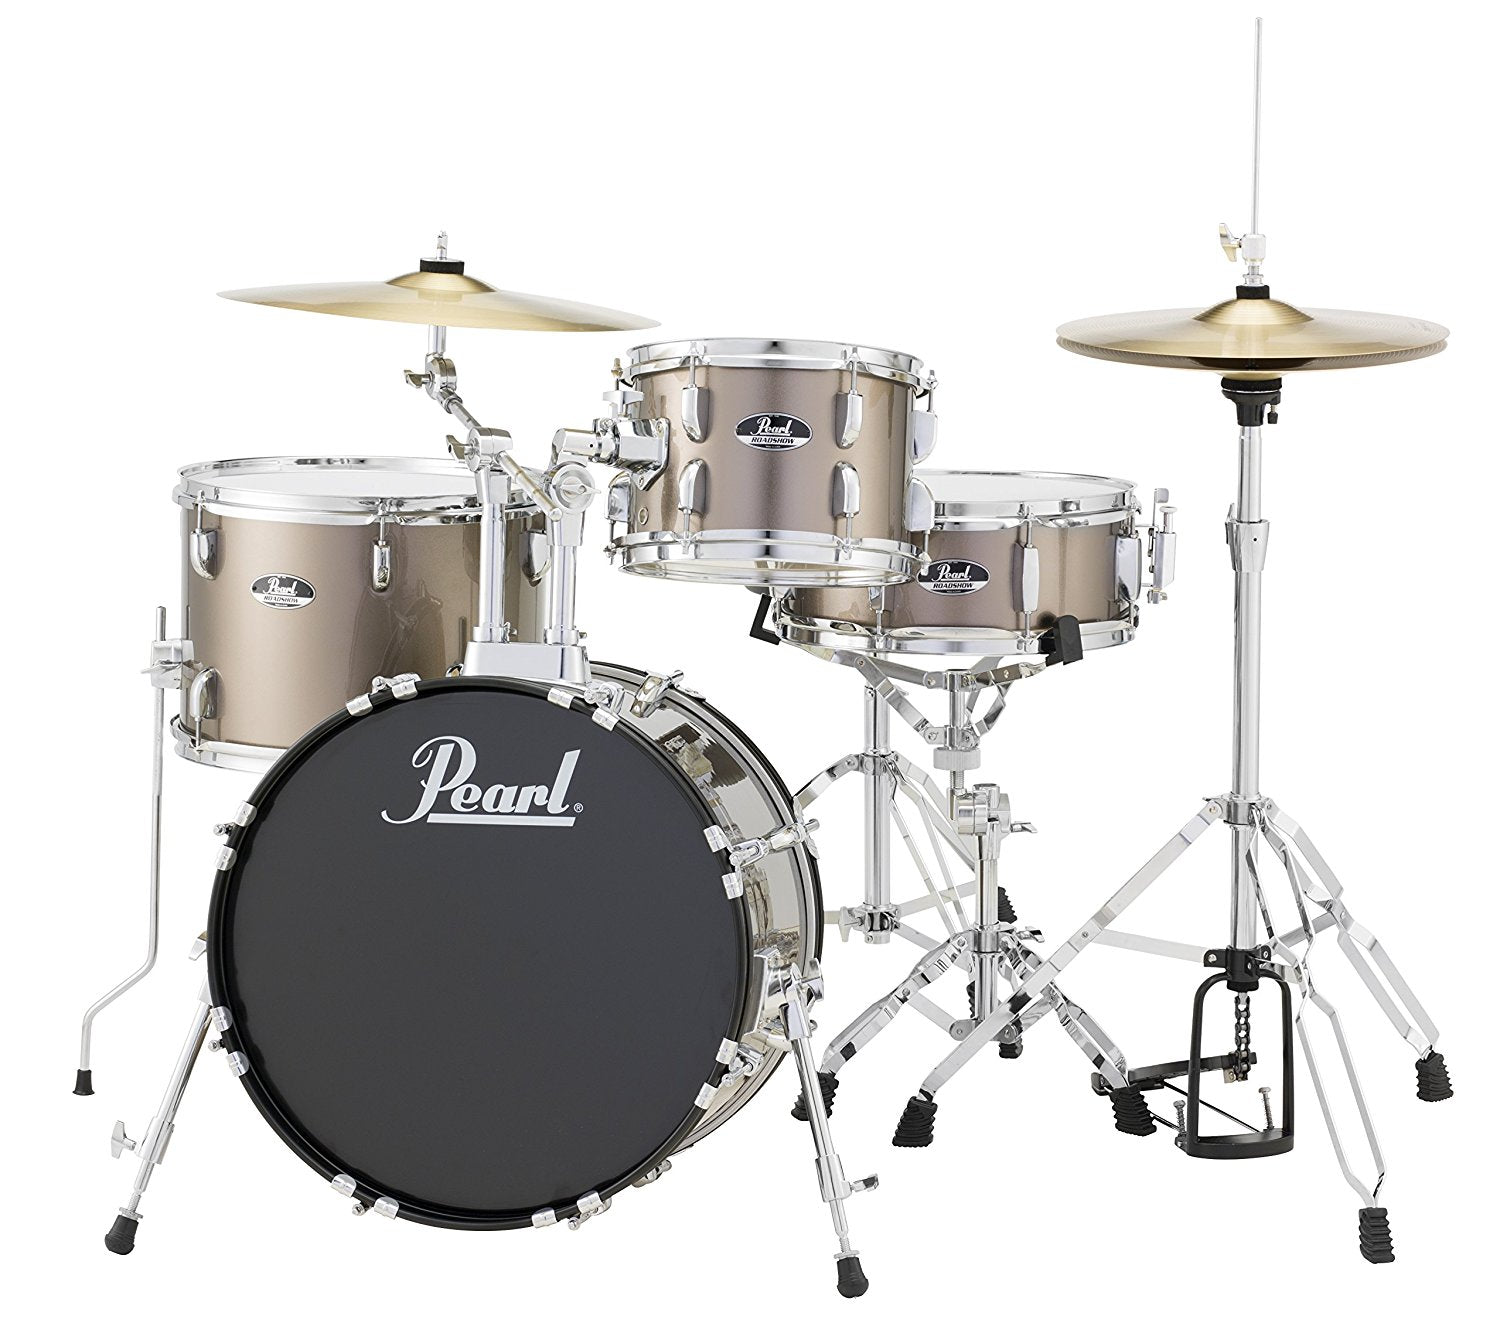 Pearl Roadshow 4-Piece Drum Set Bronze Metallic Complete with Hardware and Cymbals RS584CC707